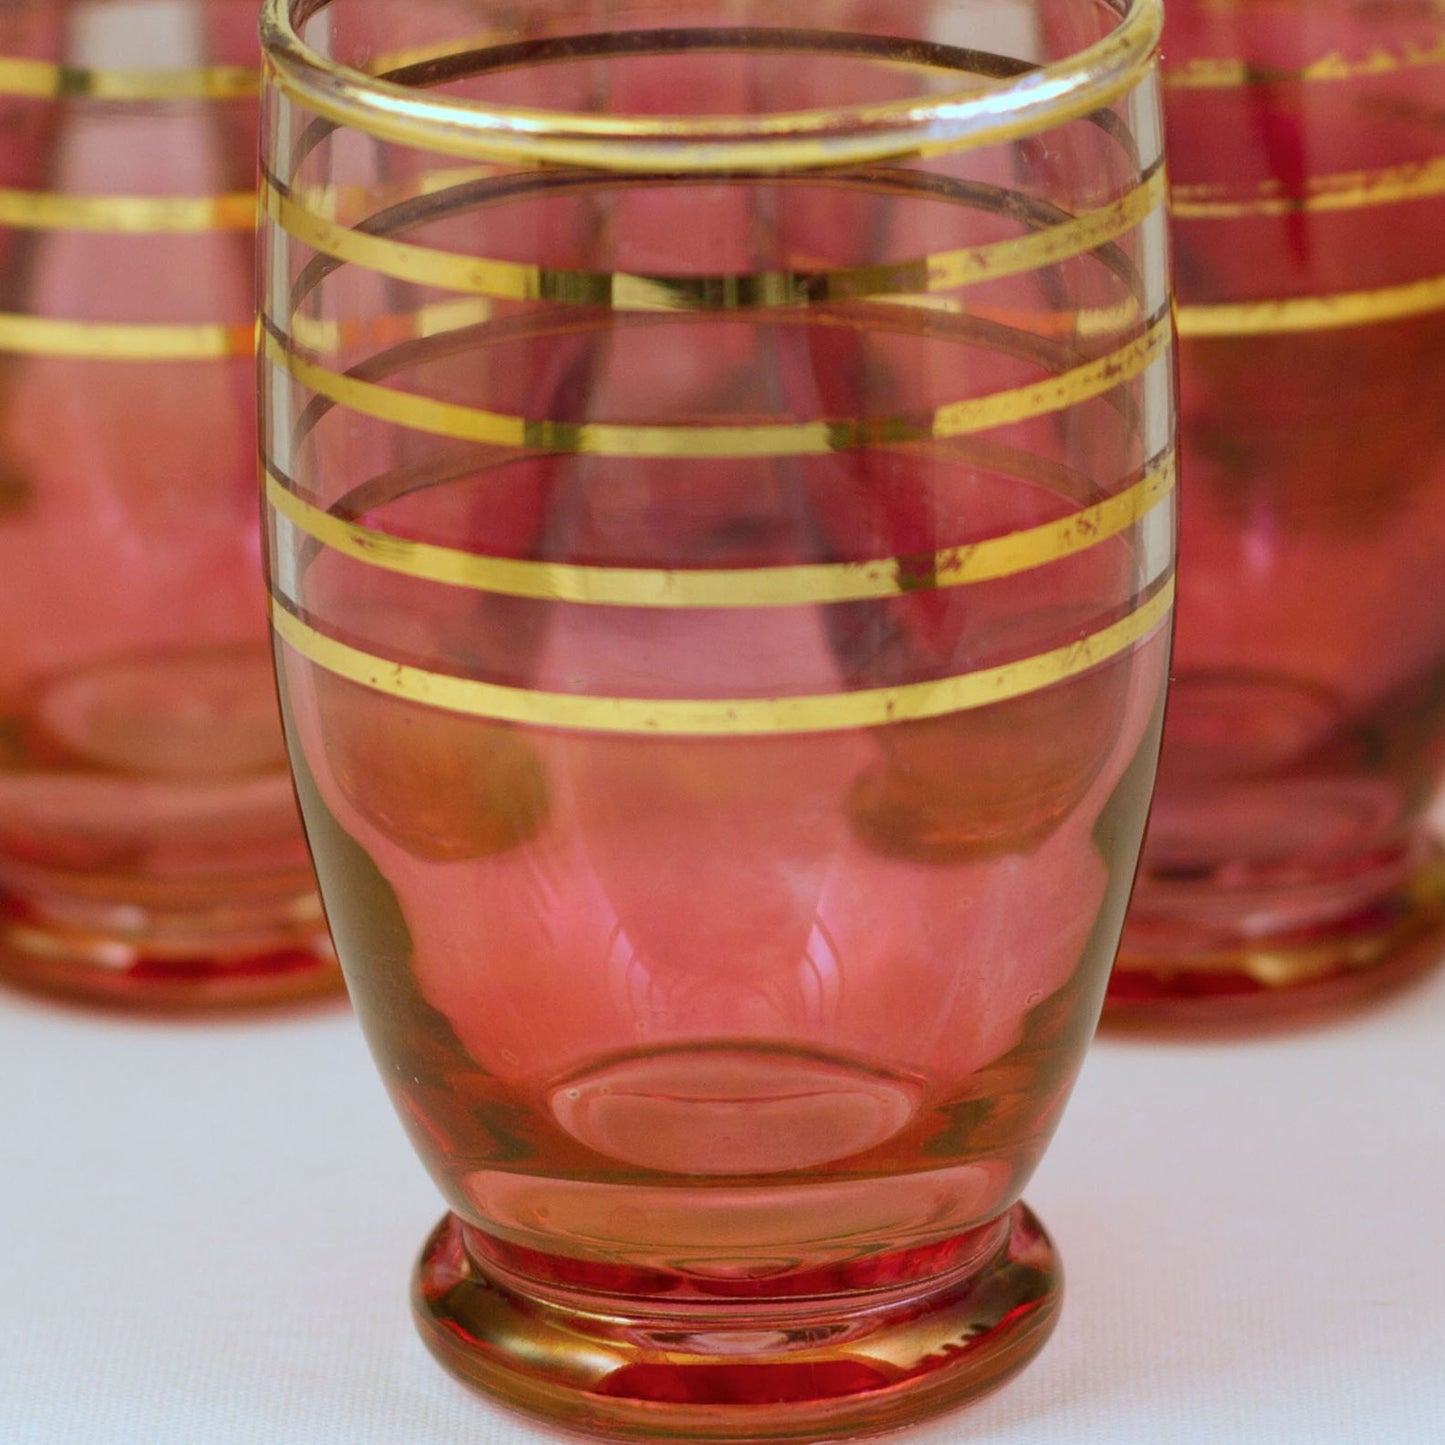 CRANBERRY GLASS Juice Tumblers with Gold Stripes (Set of 6)